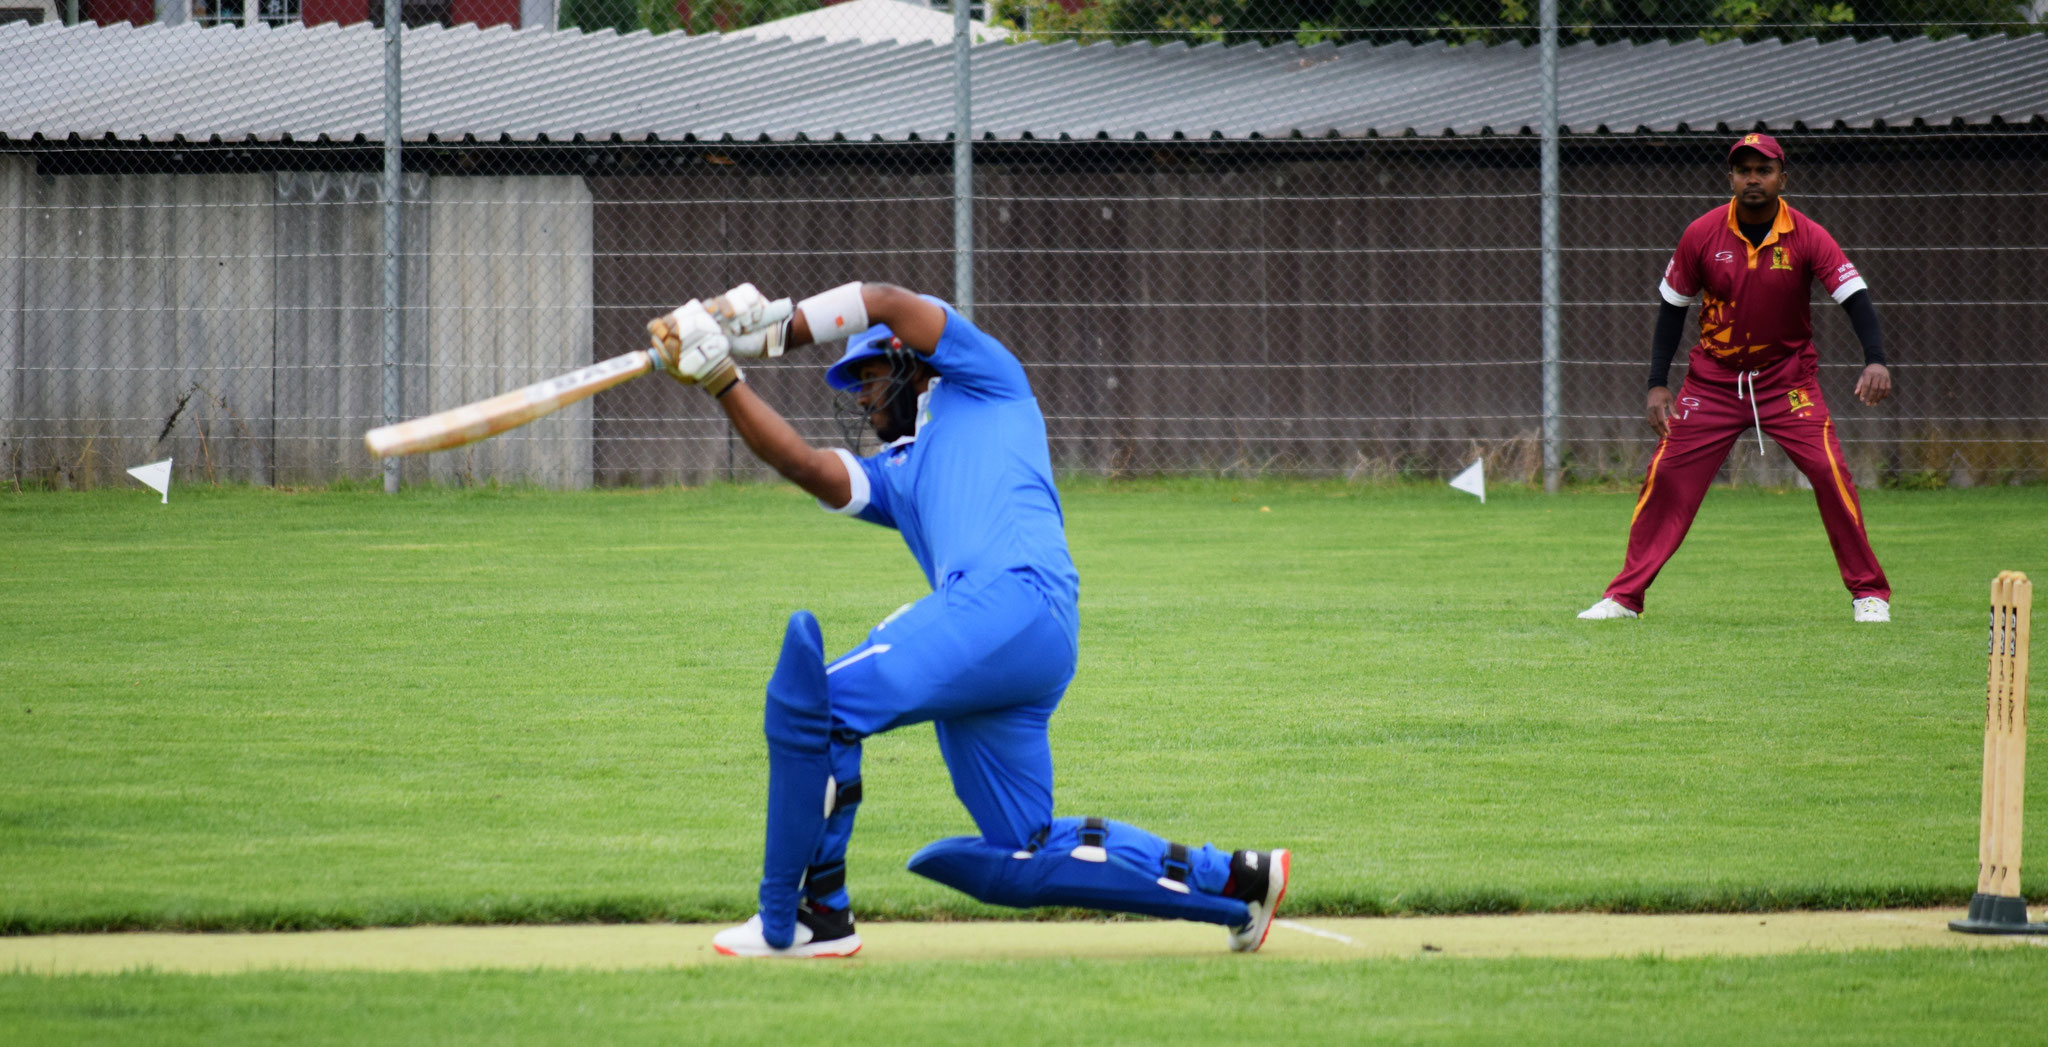 Lavan adds another 58 with Ruan.